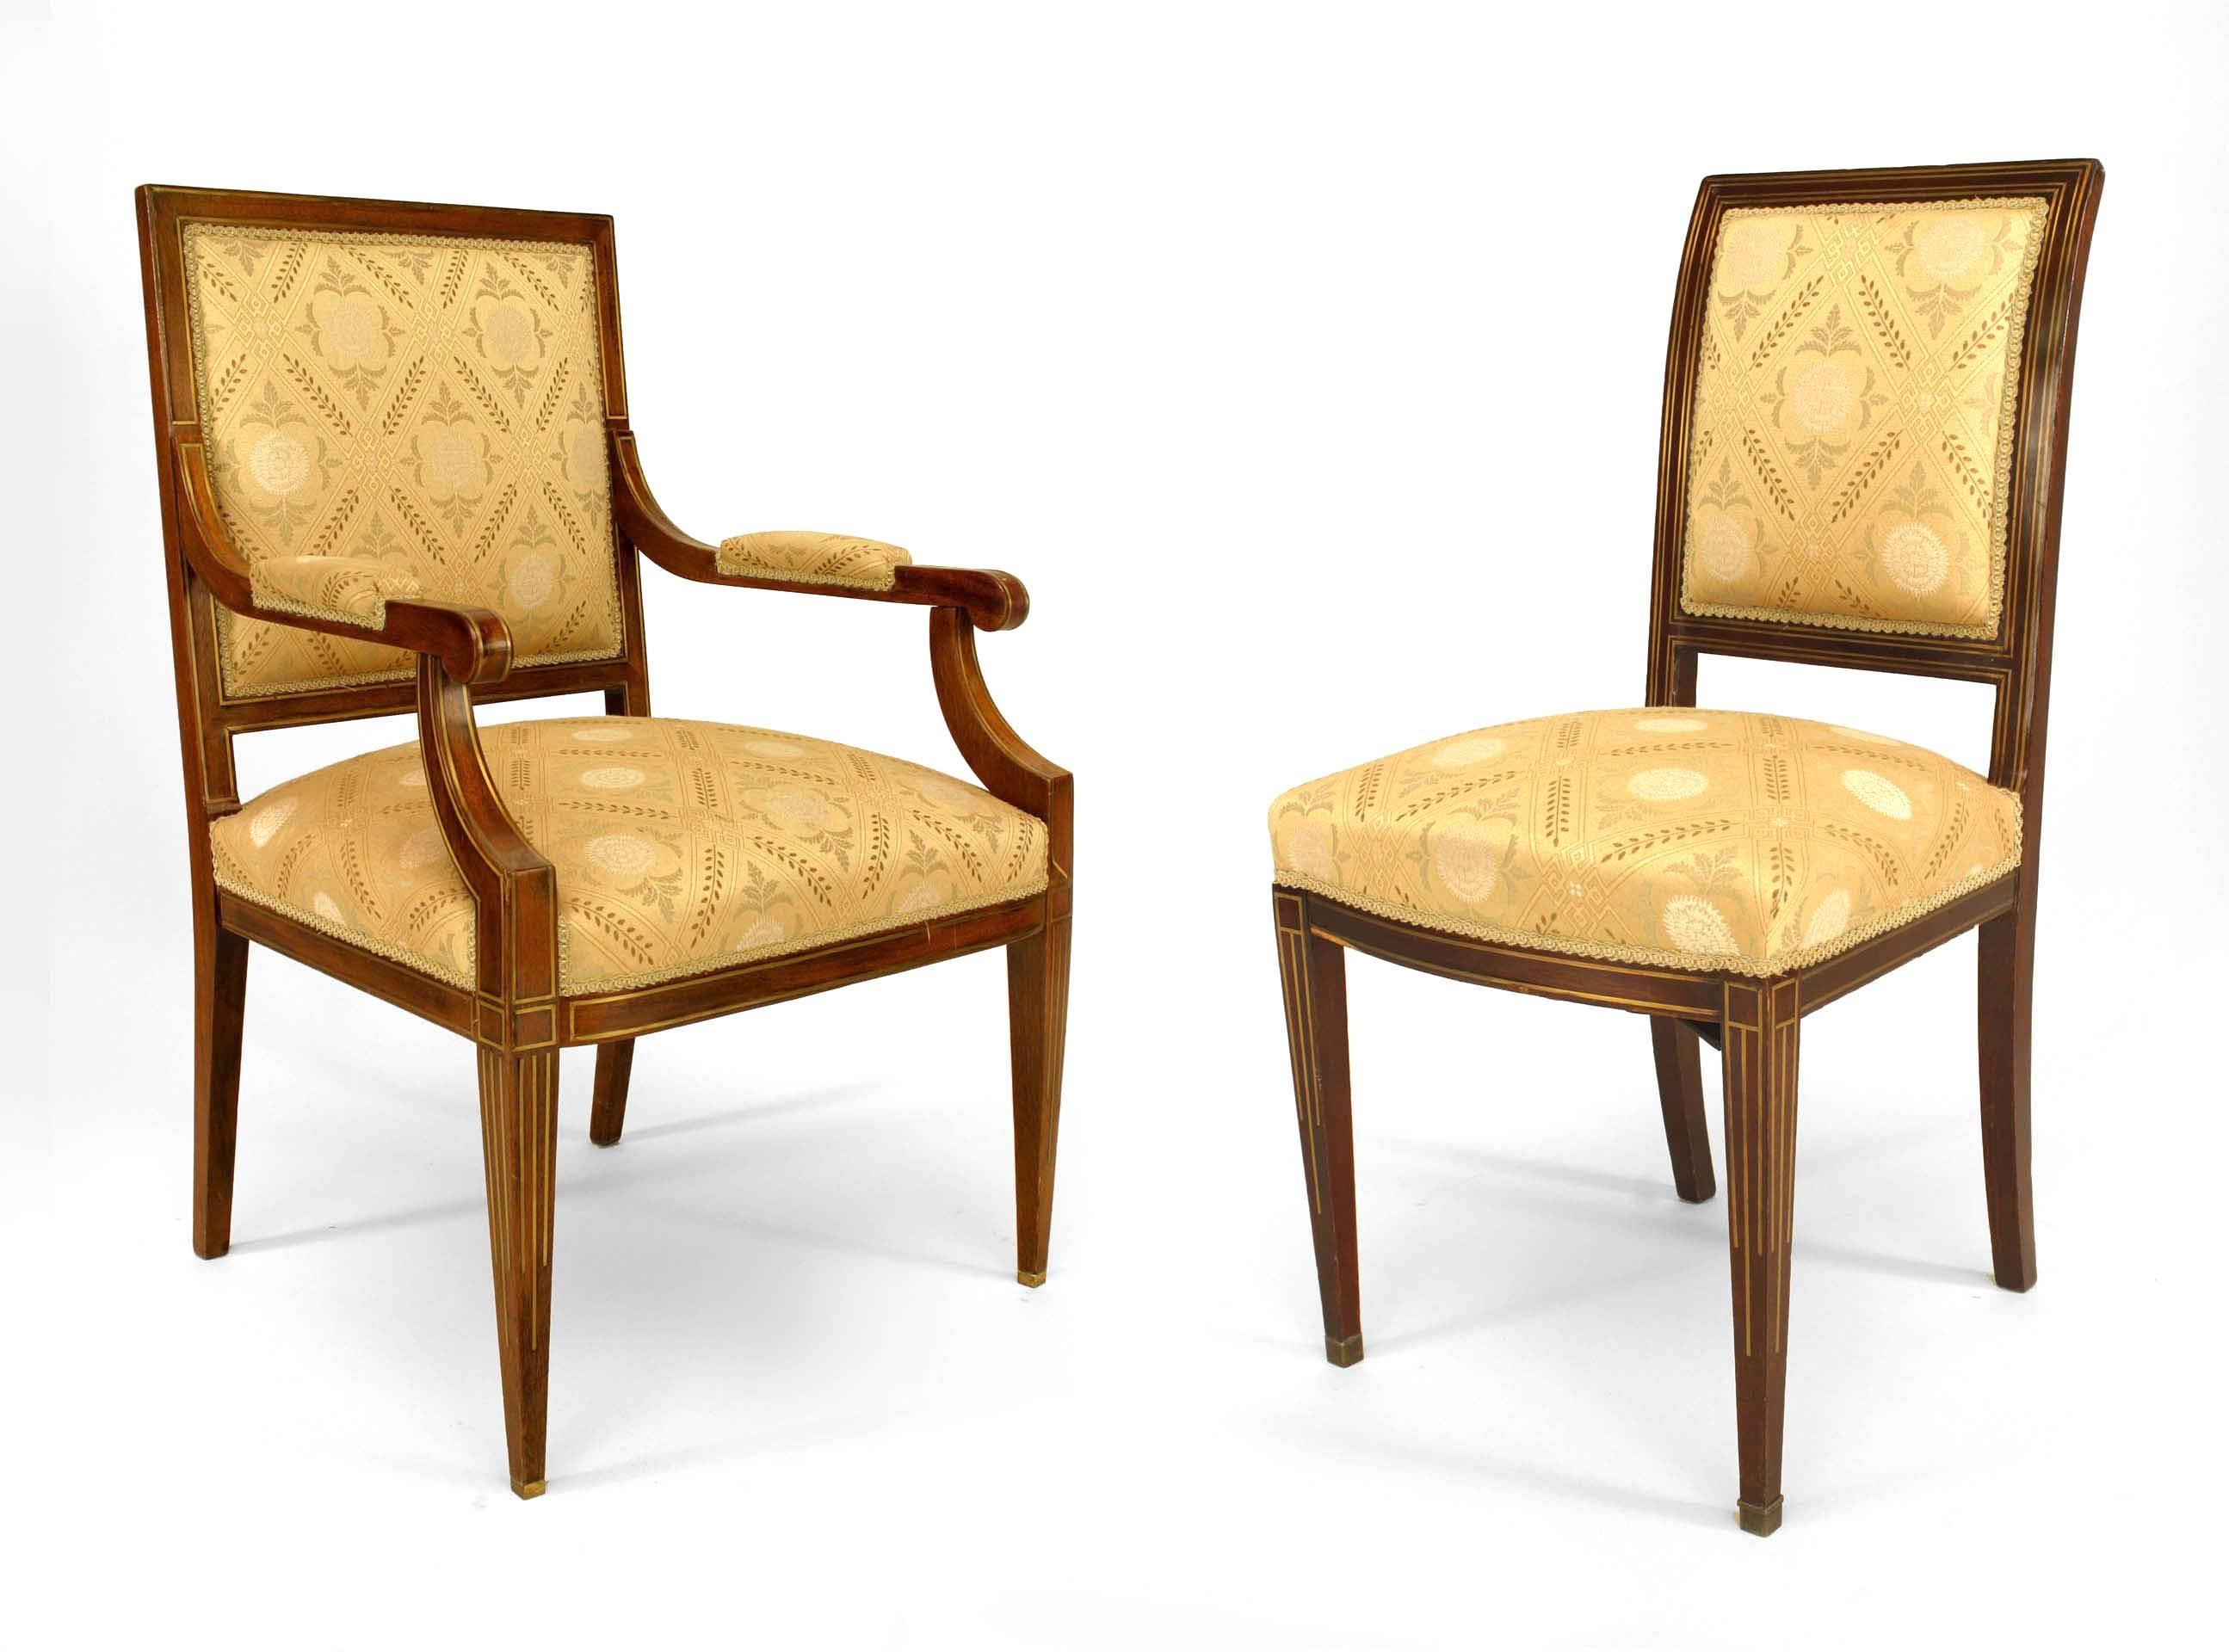 Set of 8 Continental Baltic (19th Cent) mahogany square back chairs with inlaid brass banding on square tapered legs and upholstered seat & back. 6 side chairs: 17¬Ω